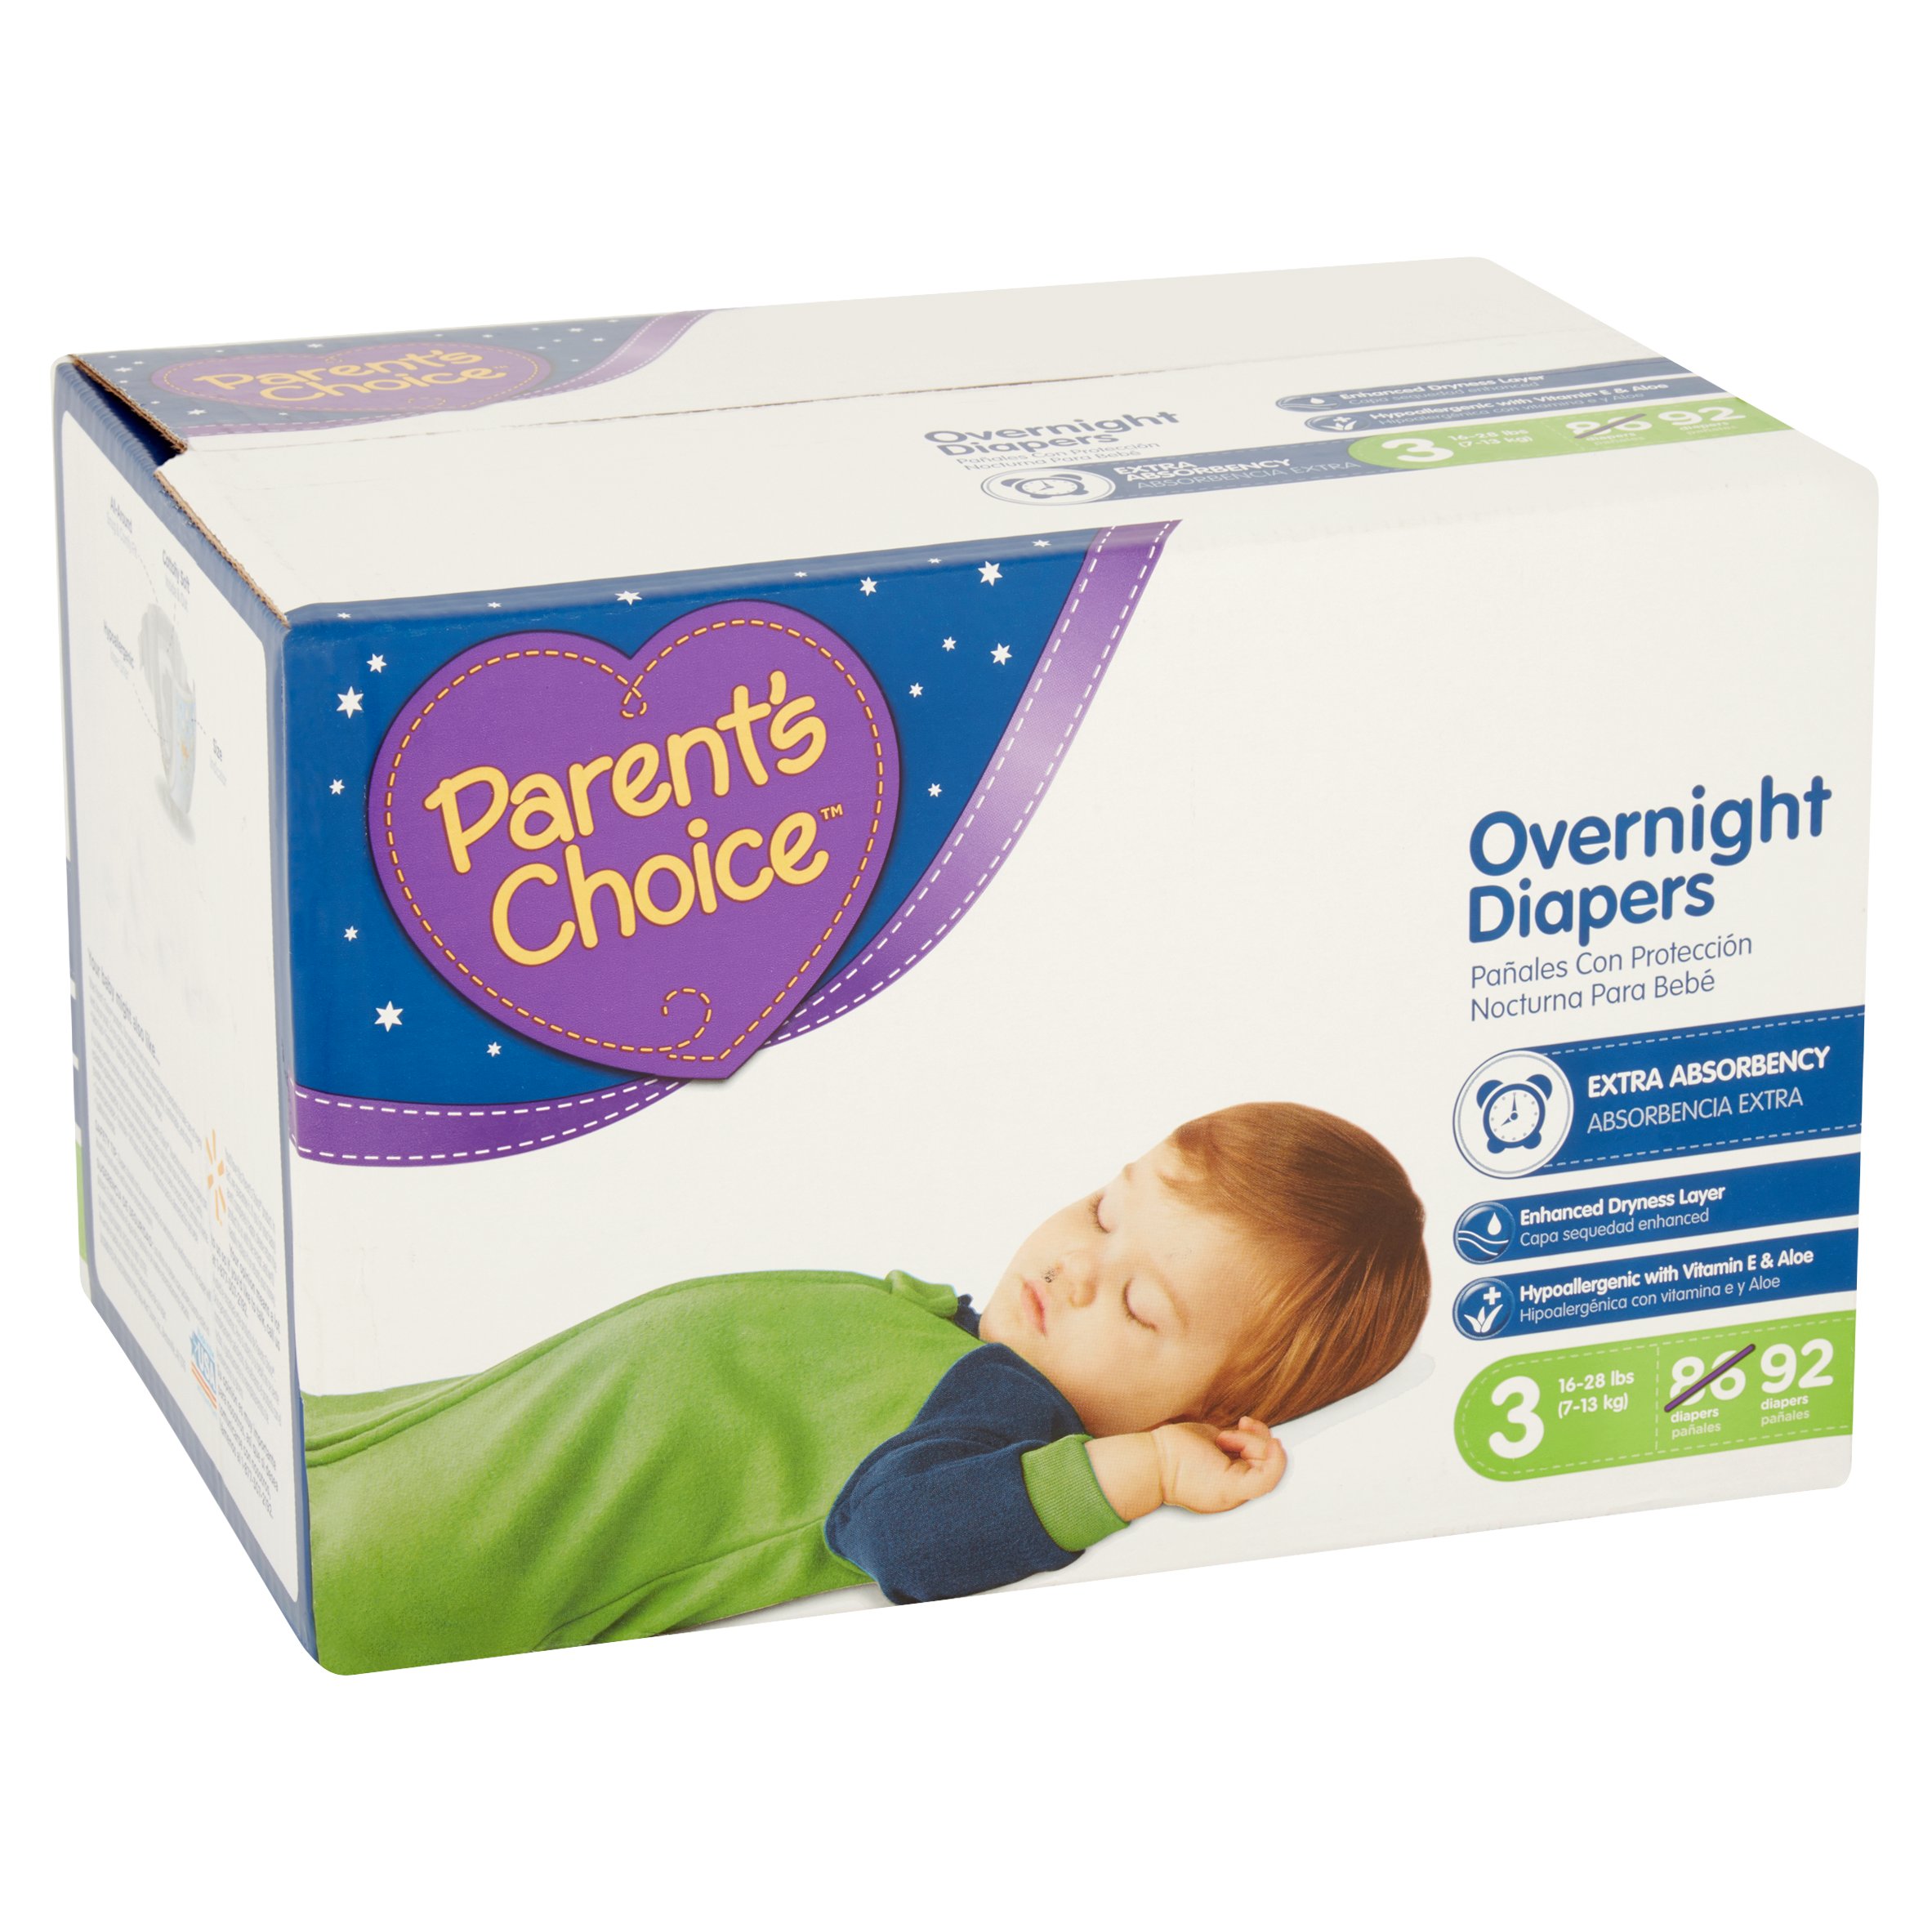 Parent's Choice Overnight Diapers, Size 3, 92 Diapers - image 4 of 5